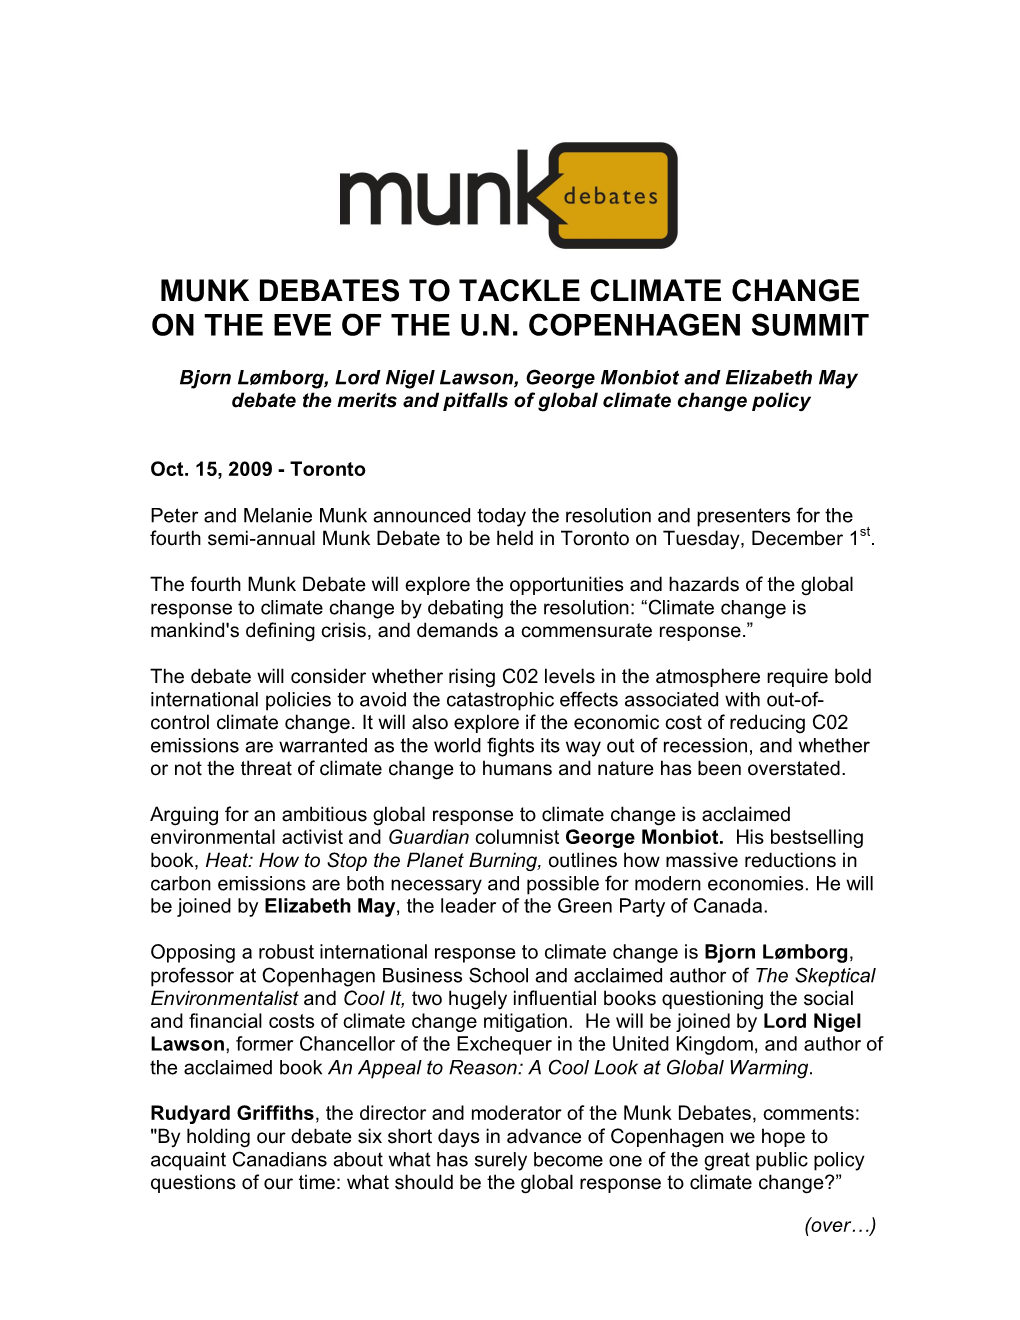 Munk Debates to Tackle Climate Change on the Eve of the U.N